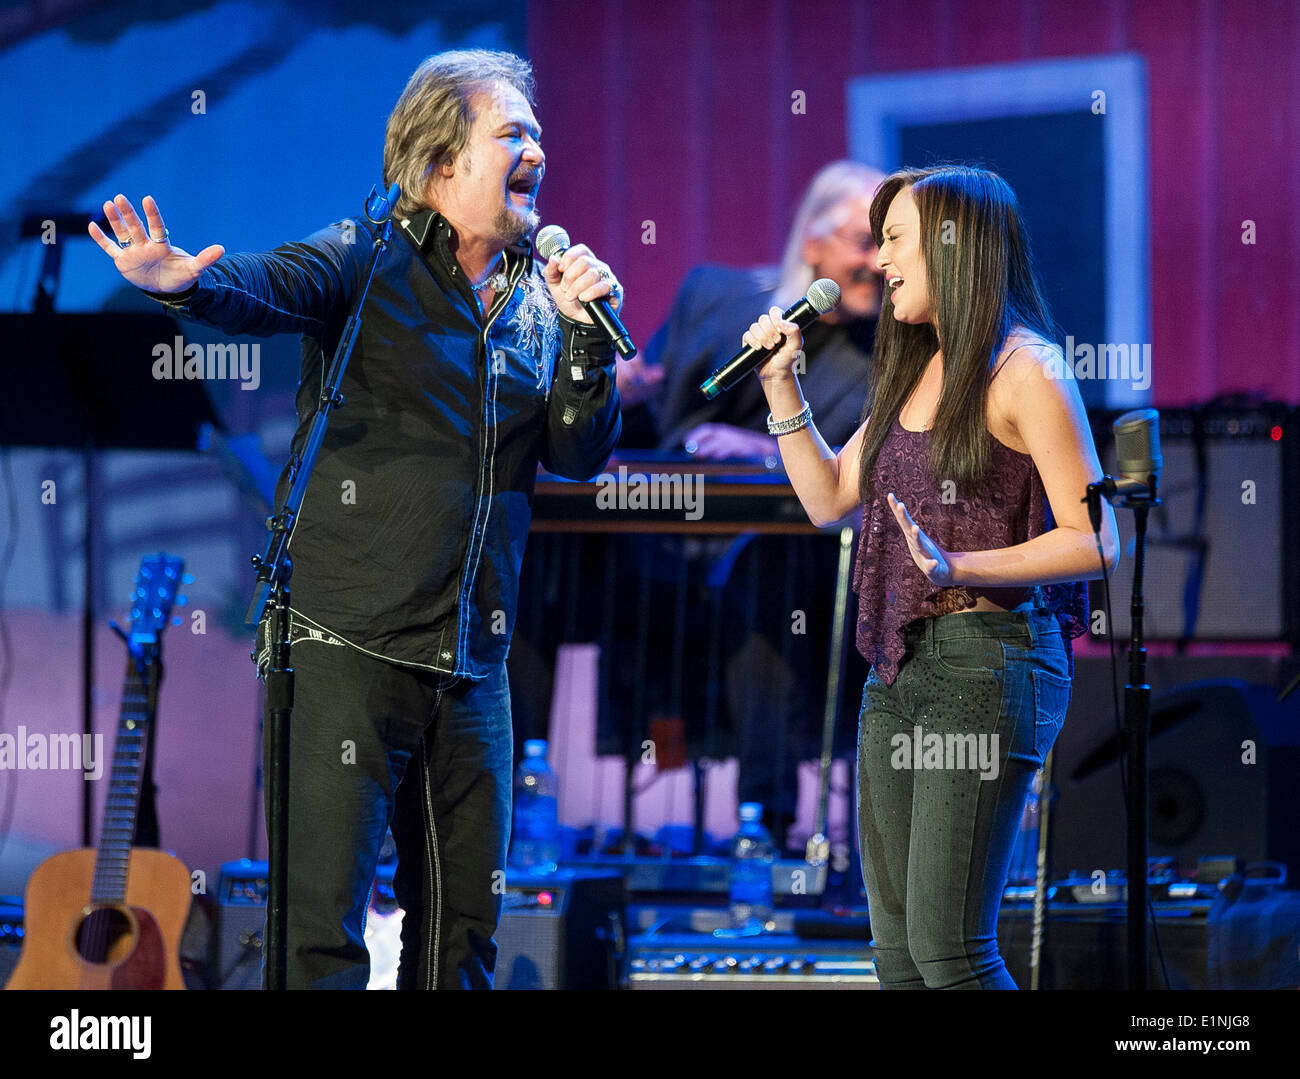 Jun. 4, 2014 - Nashville, Tennessee; USA - Musician TRAVIS TRITT and his Daughter TYLER REESE TRITT performs as part of the 13th Annual Marty Stuart Late Night Jam that took place at the Ryman Auditorium. Copyright 2014 Jason Moore. © Jason Moore/ZUMAPRESS.com/Alamy Live News Stock Photo